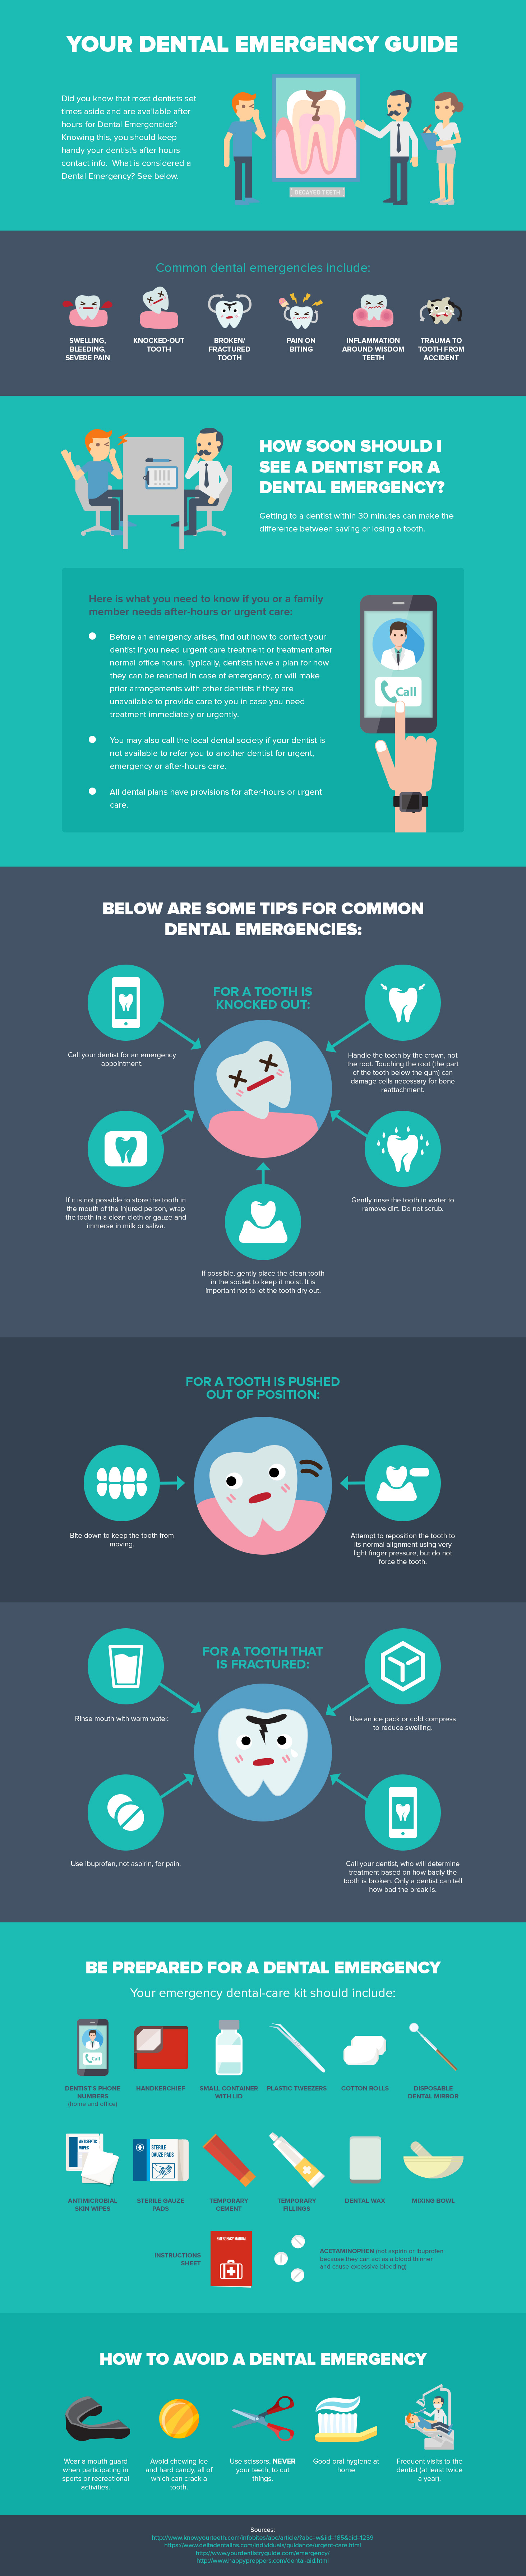 Dental Emergency infographic high resolution - What to Do In Case of a Dental Emergency